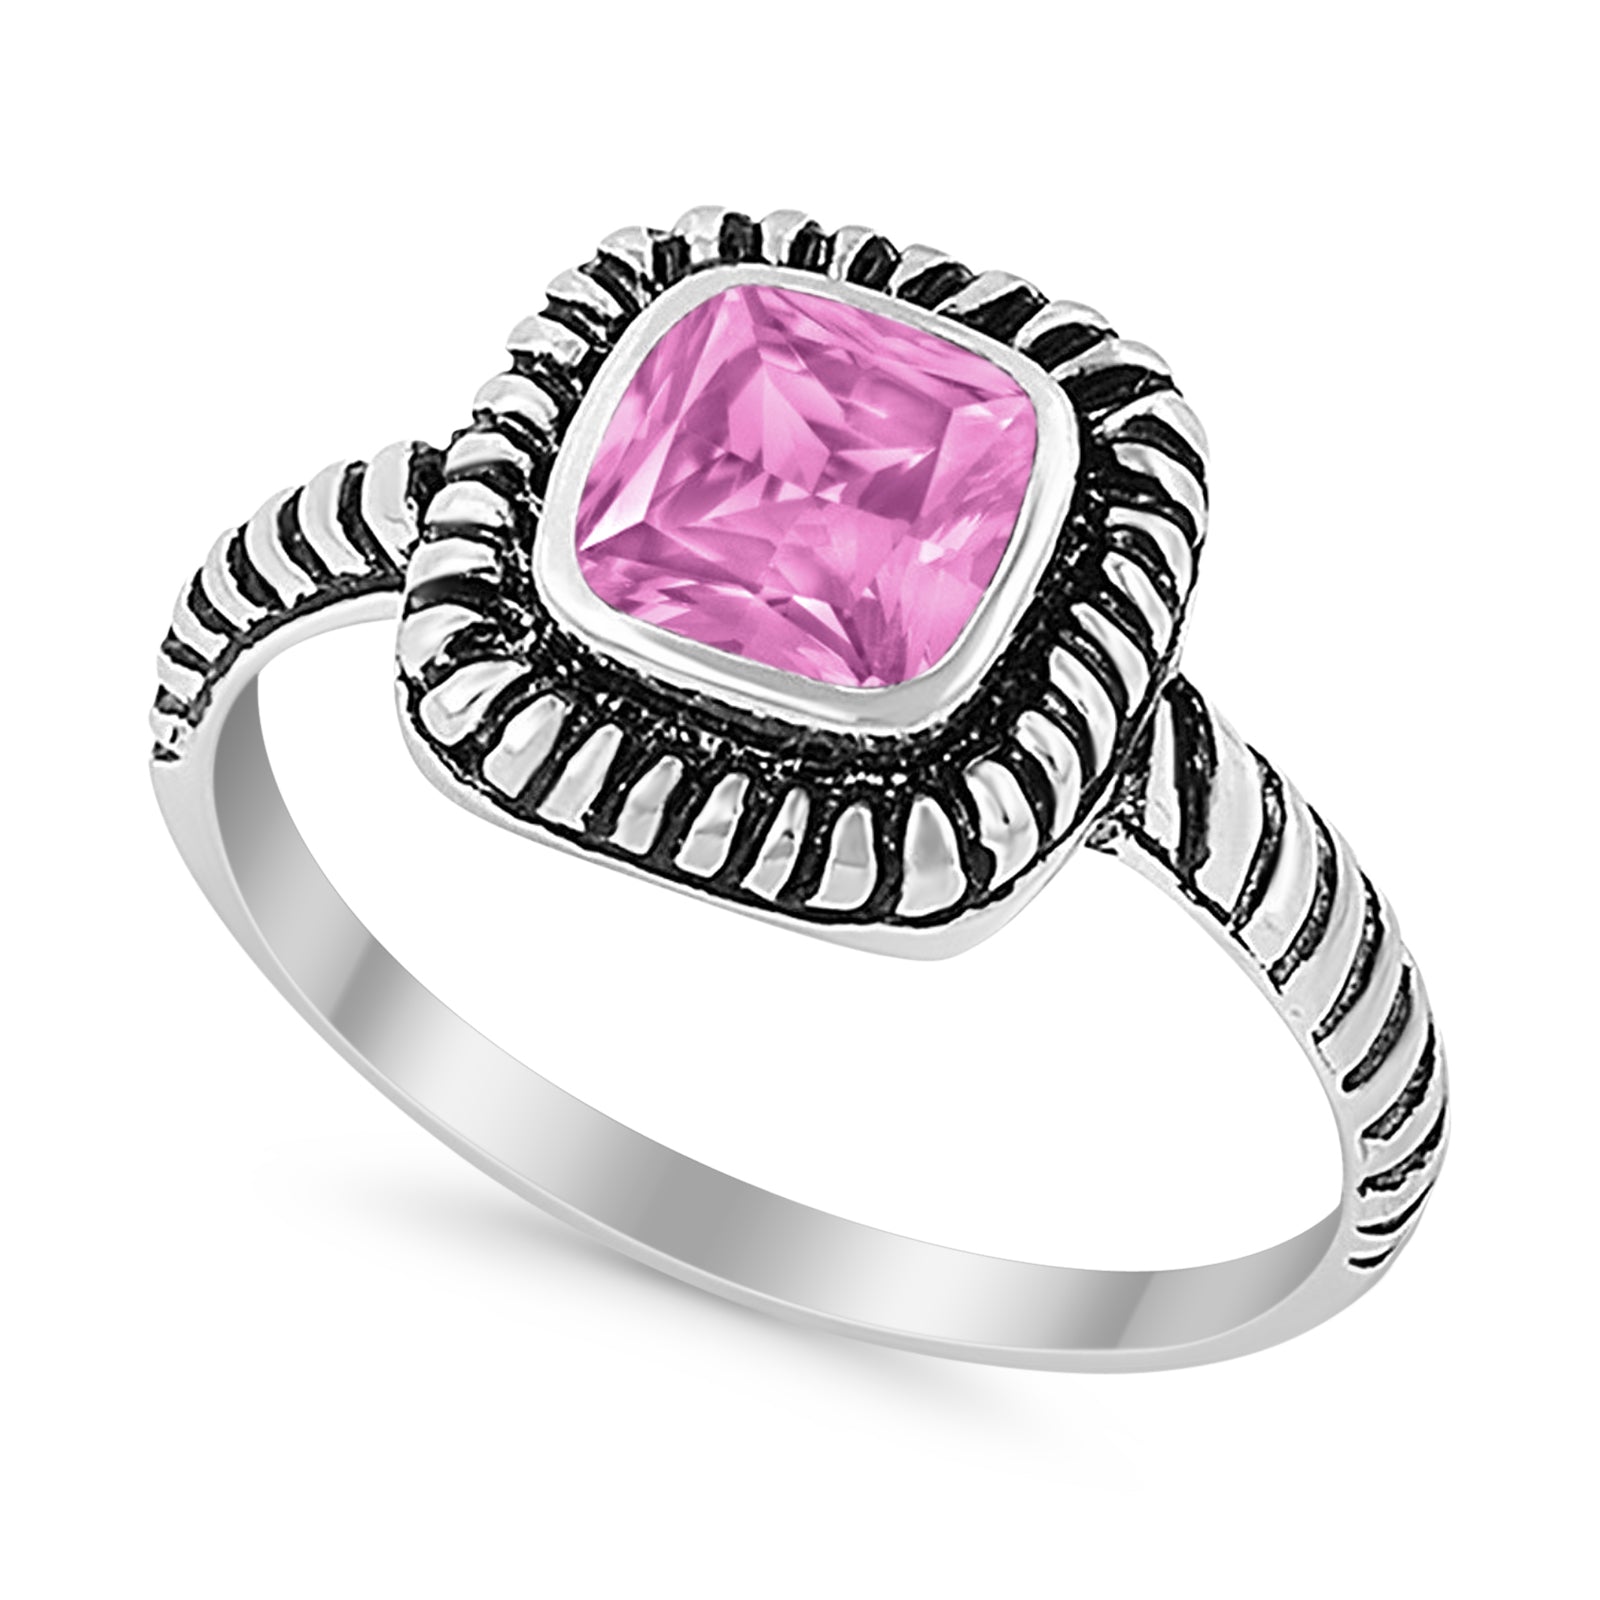 Princess Cut Simulated Pink Cubic Zirconia Oxidized Design Ring 925 Sterling Silver